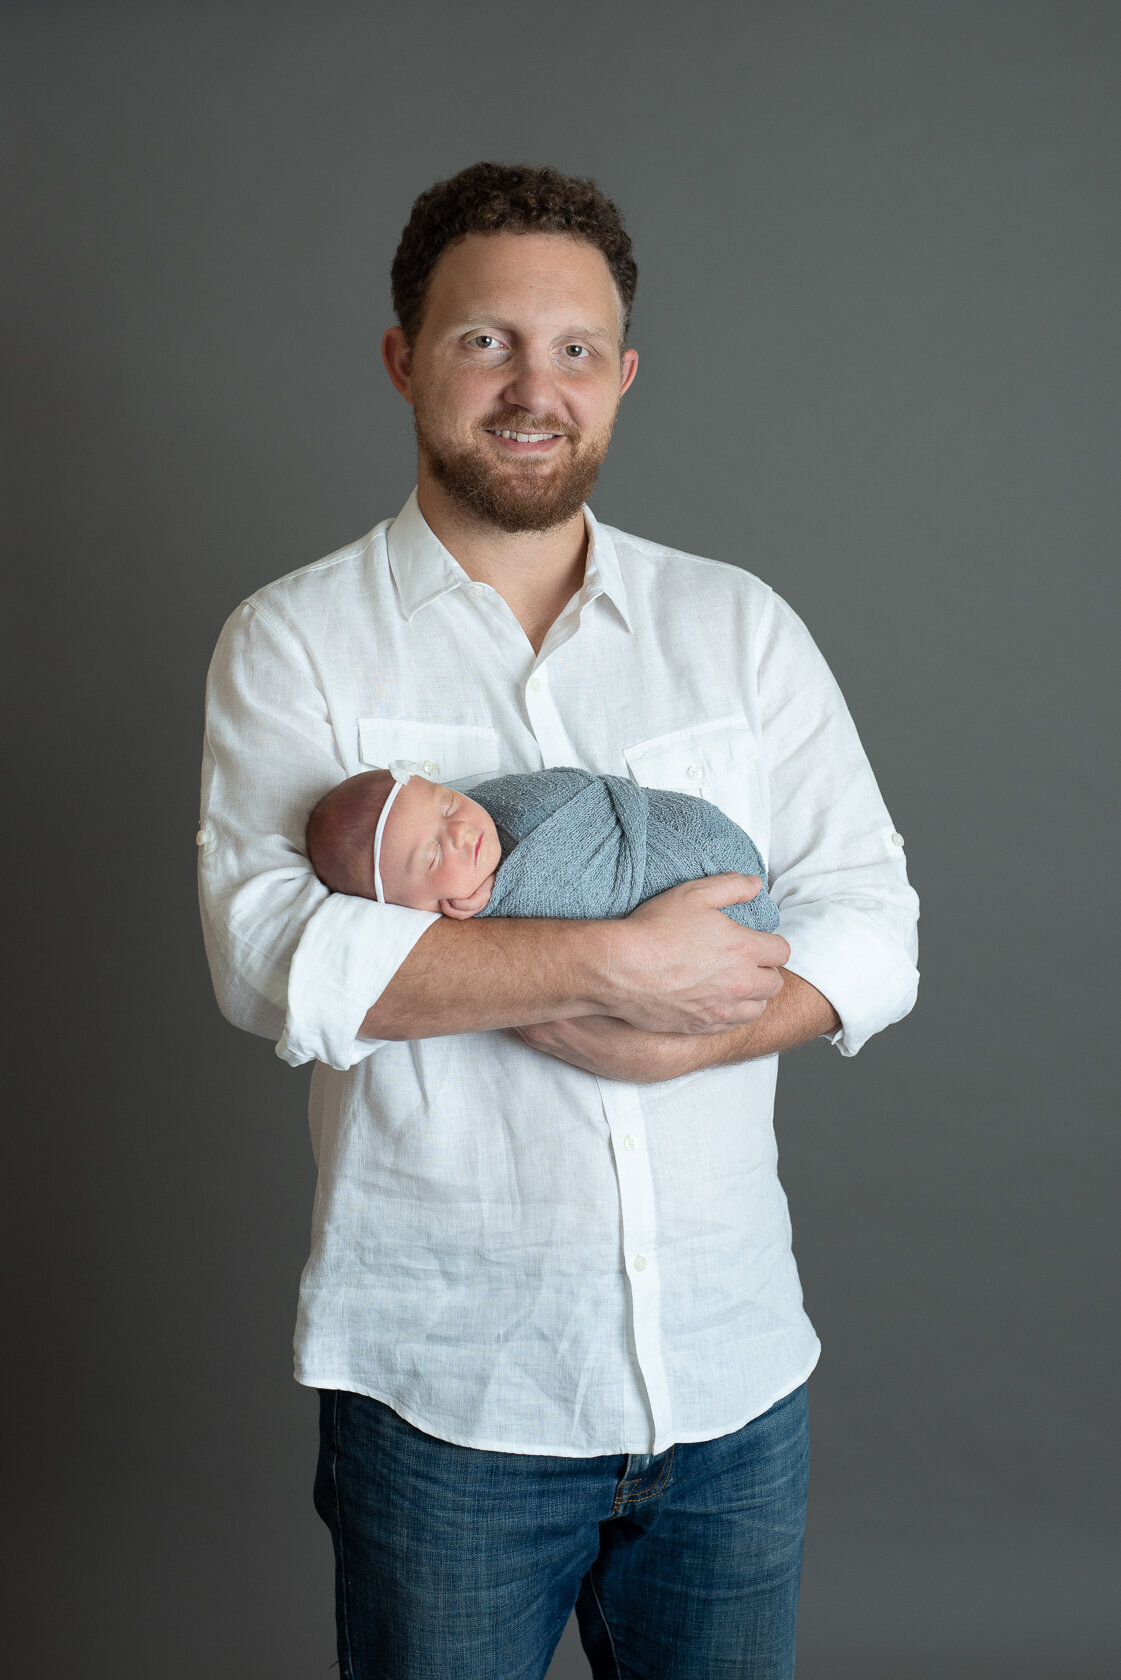 Newborn and Dad moment captured by Laura King Photography